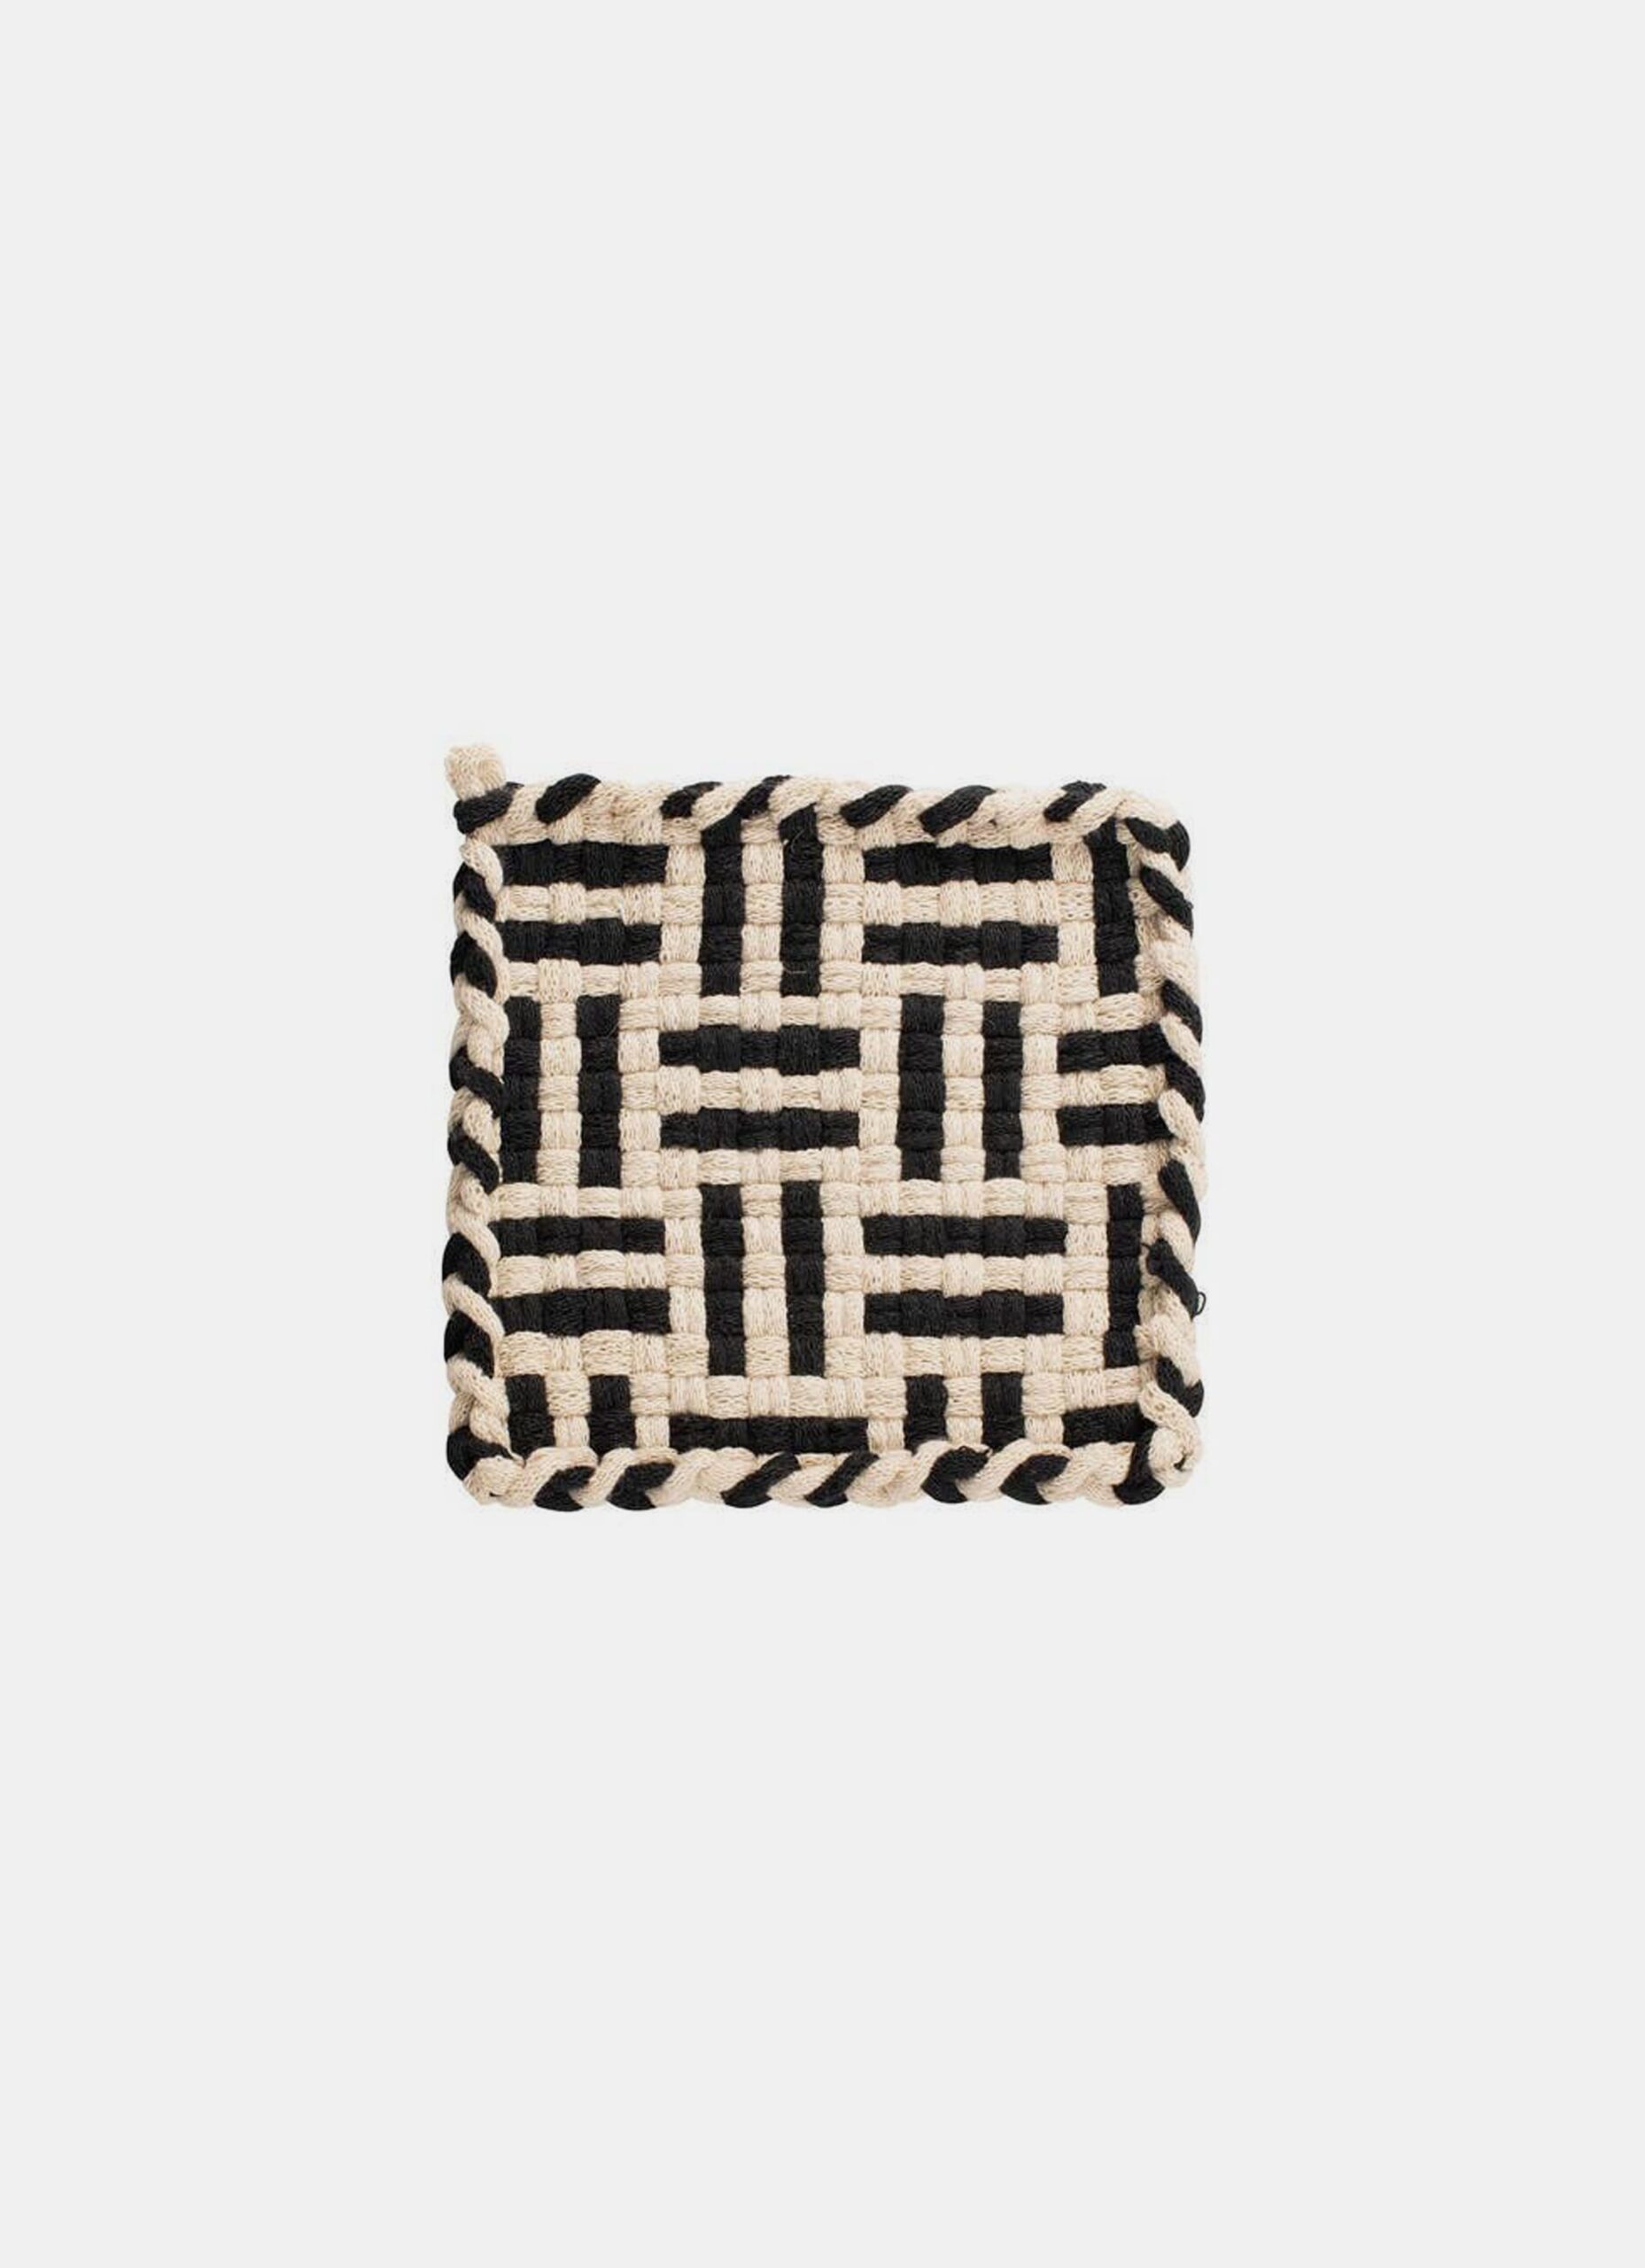 Kate Kilmurray - Handwoven Potholder - Forest Collection - Flax and Black